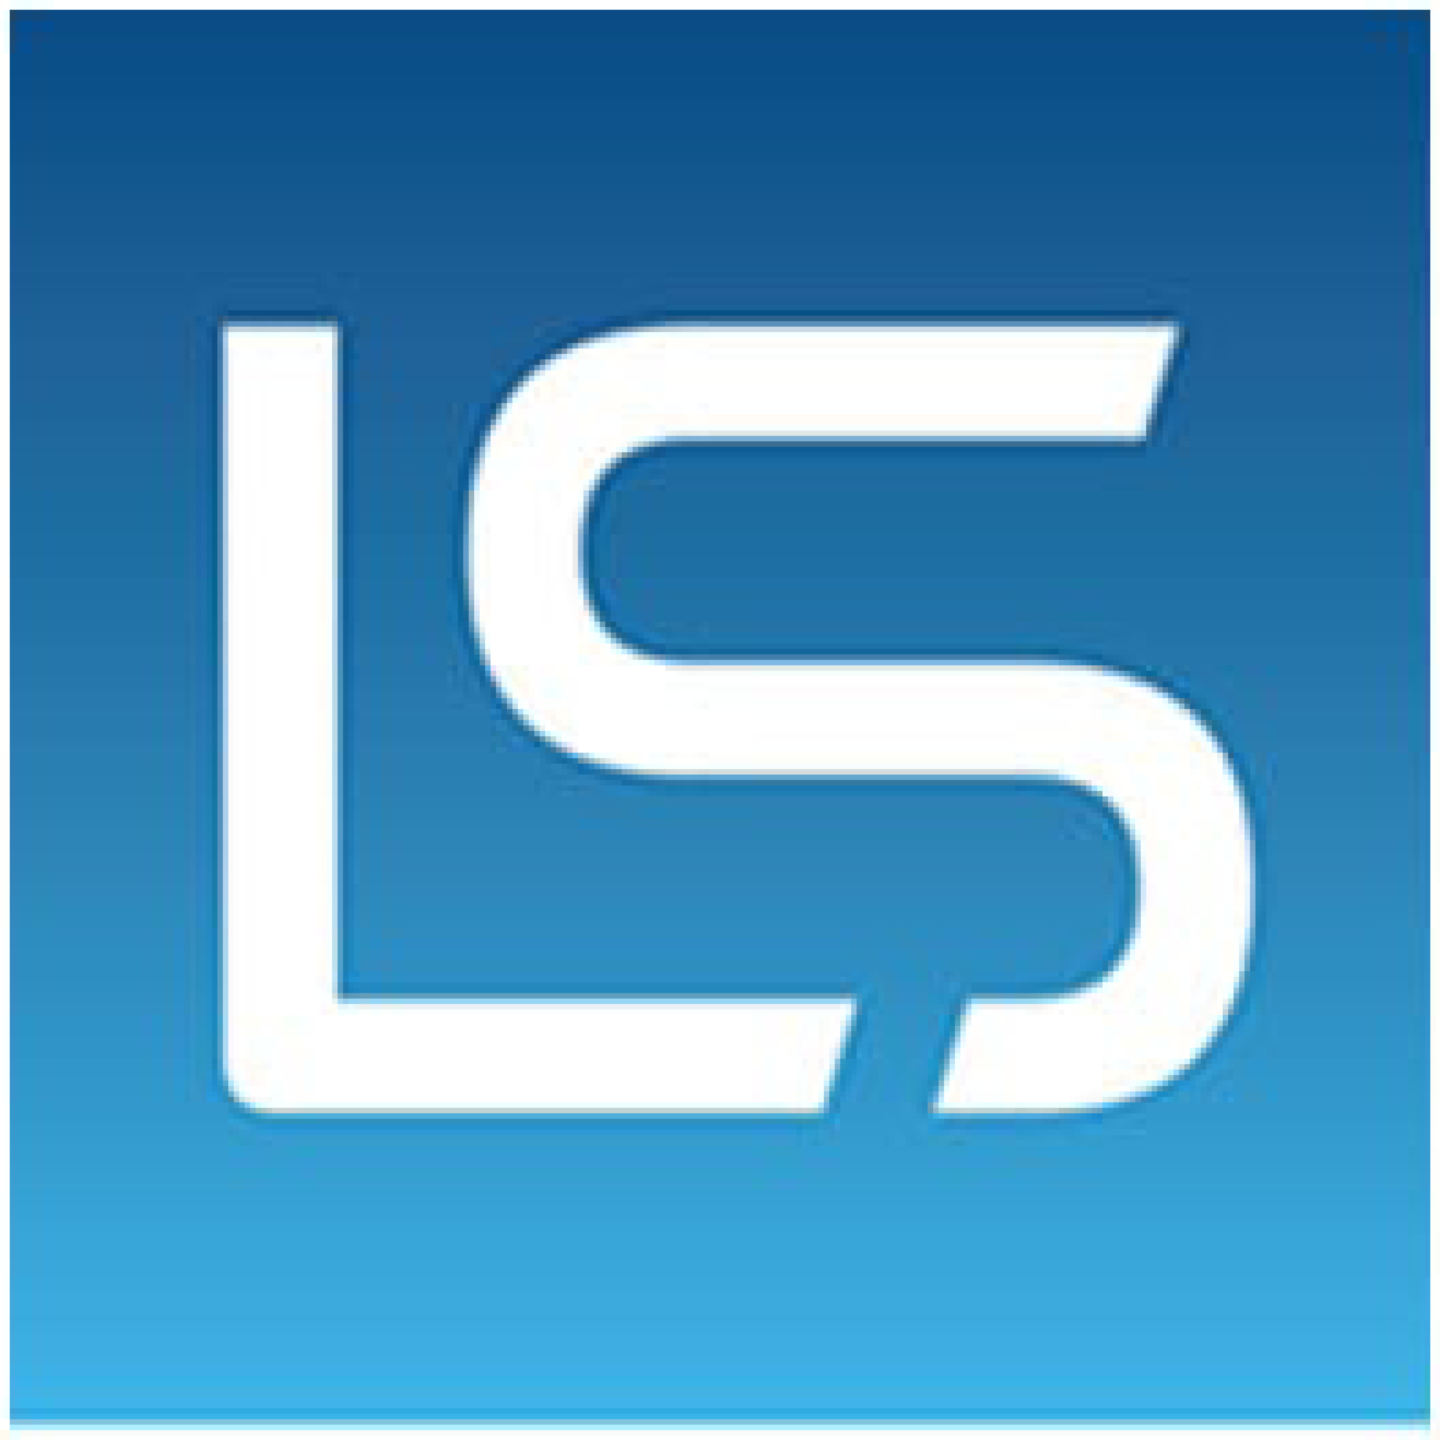 LS logo - eVolpe Consulting Group